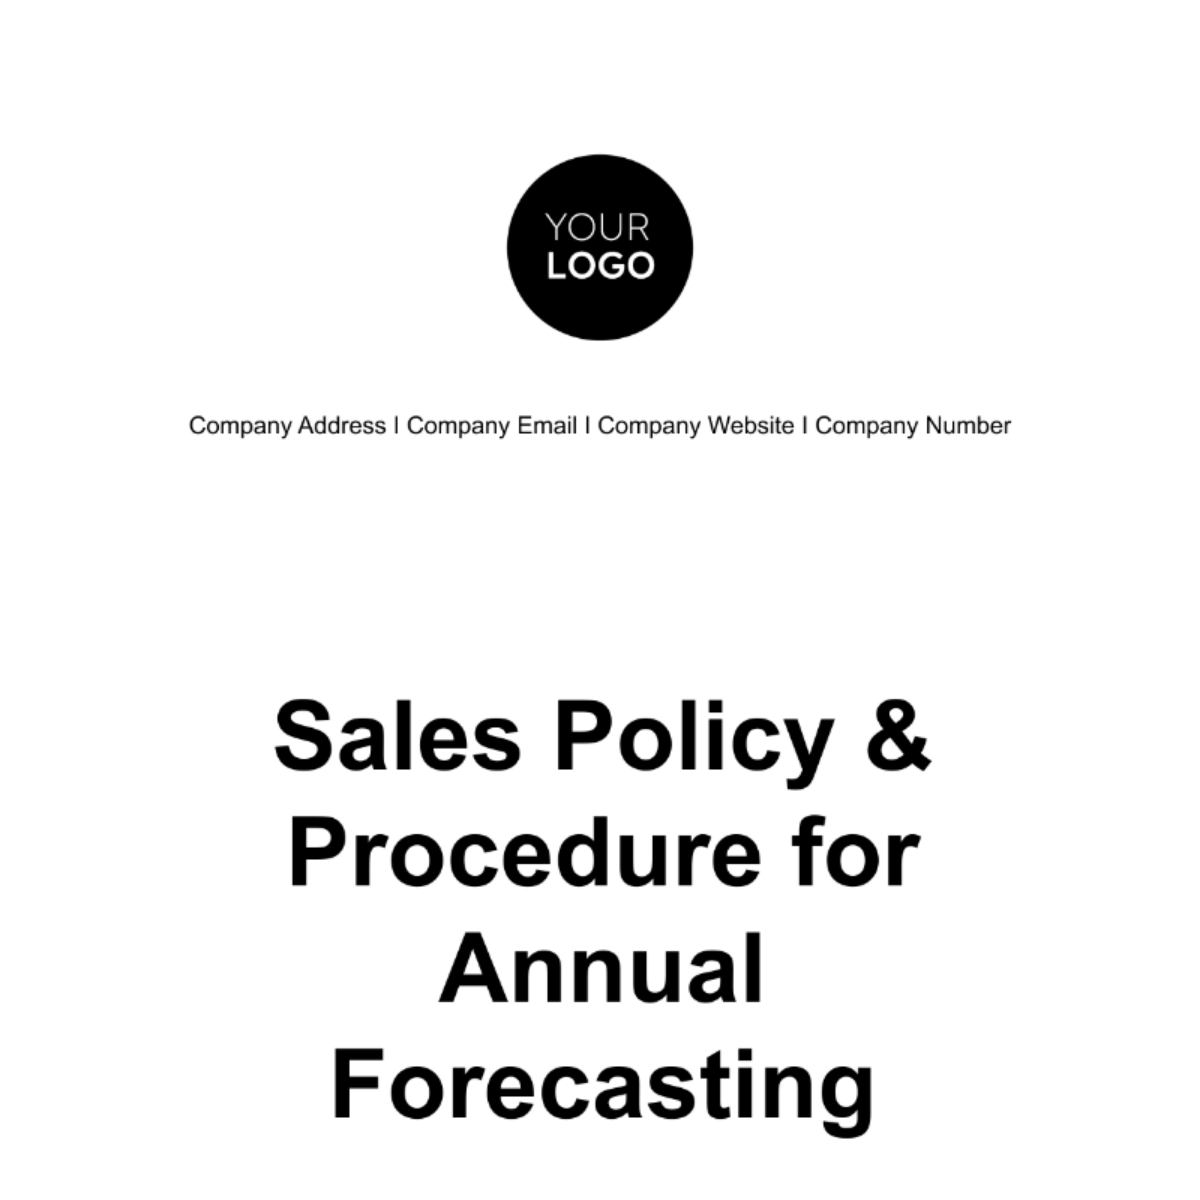 Sales Policy & Procedure for Annual Forecasting Template